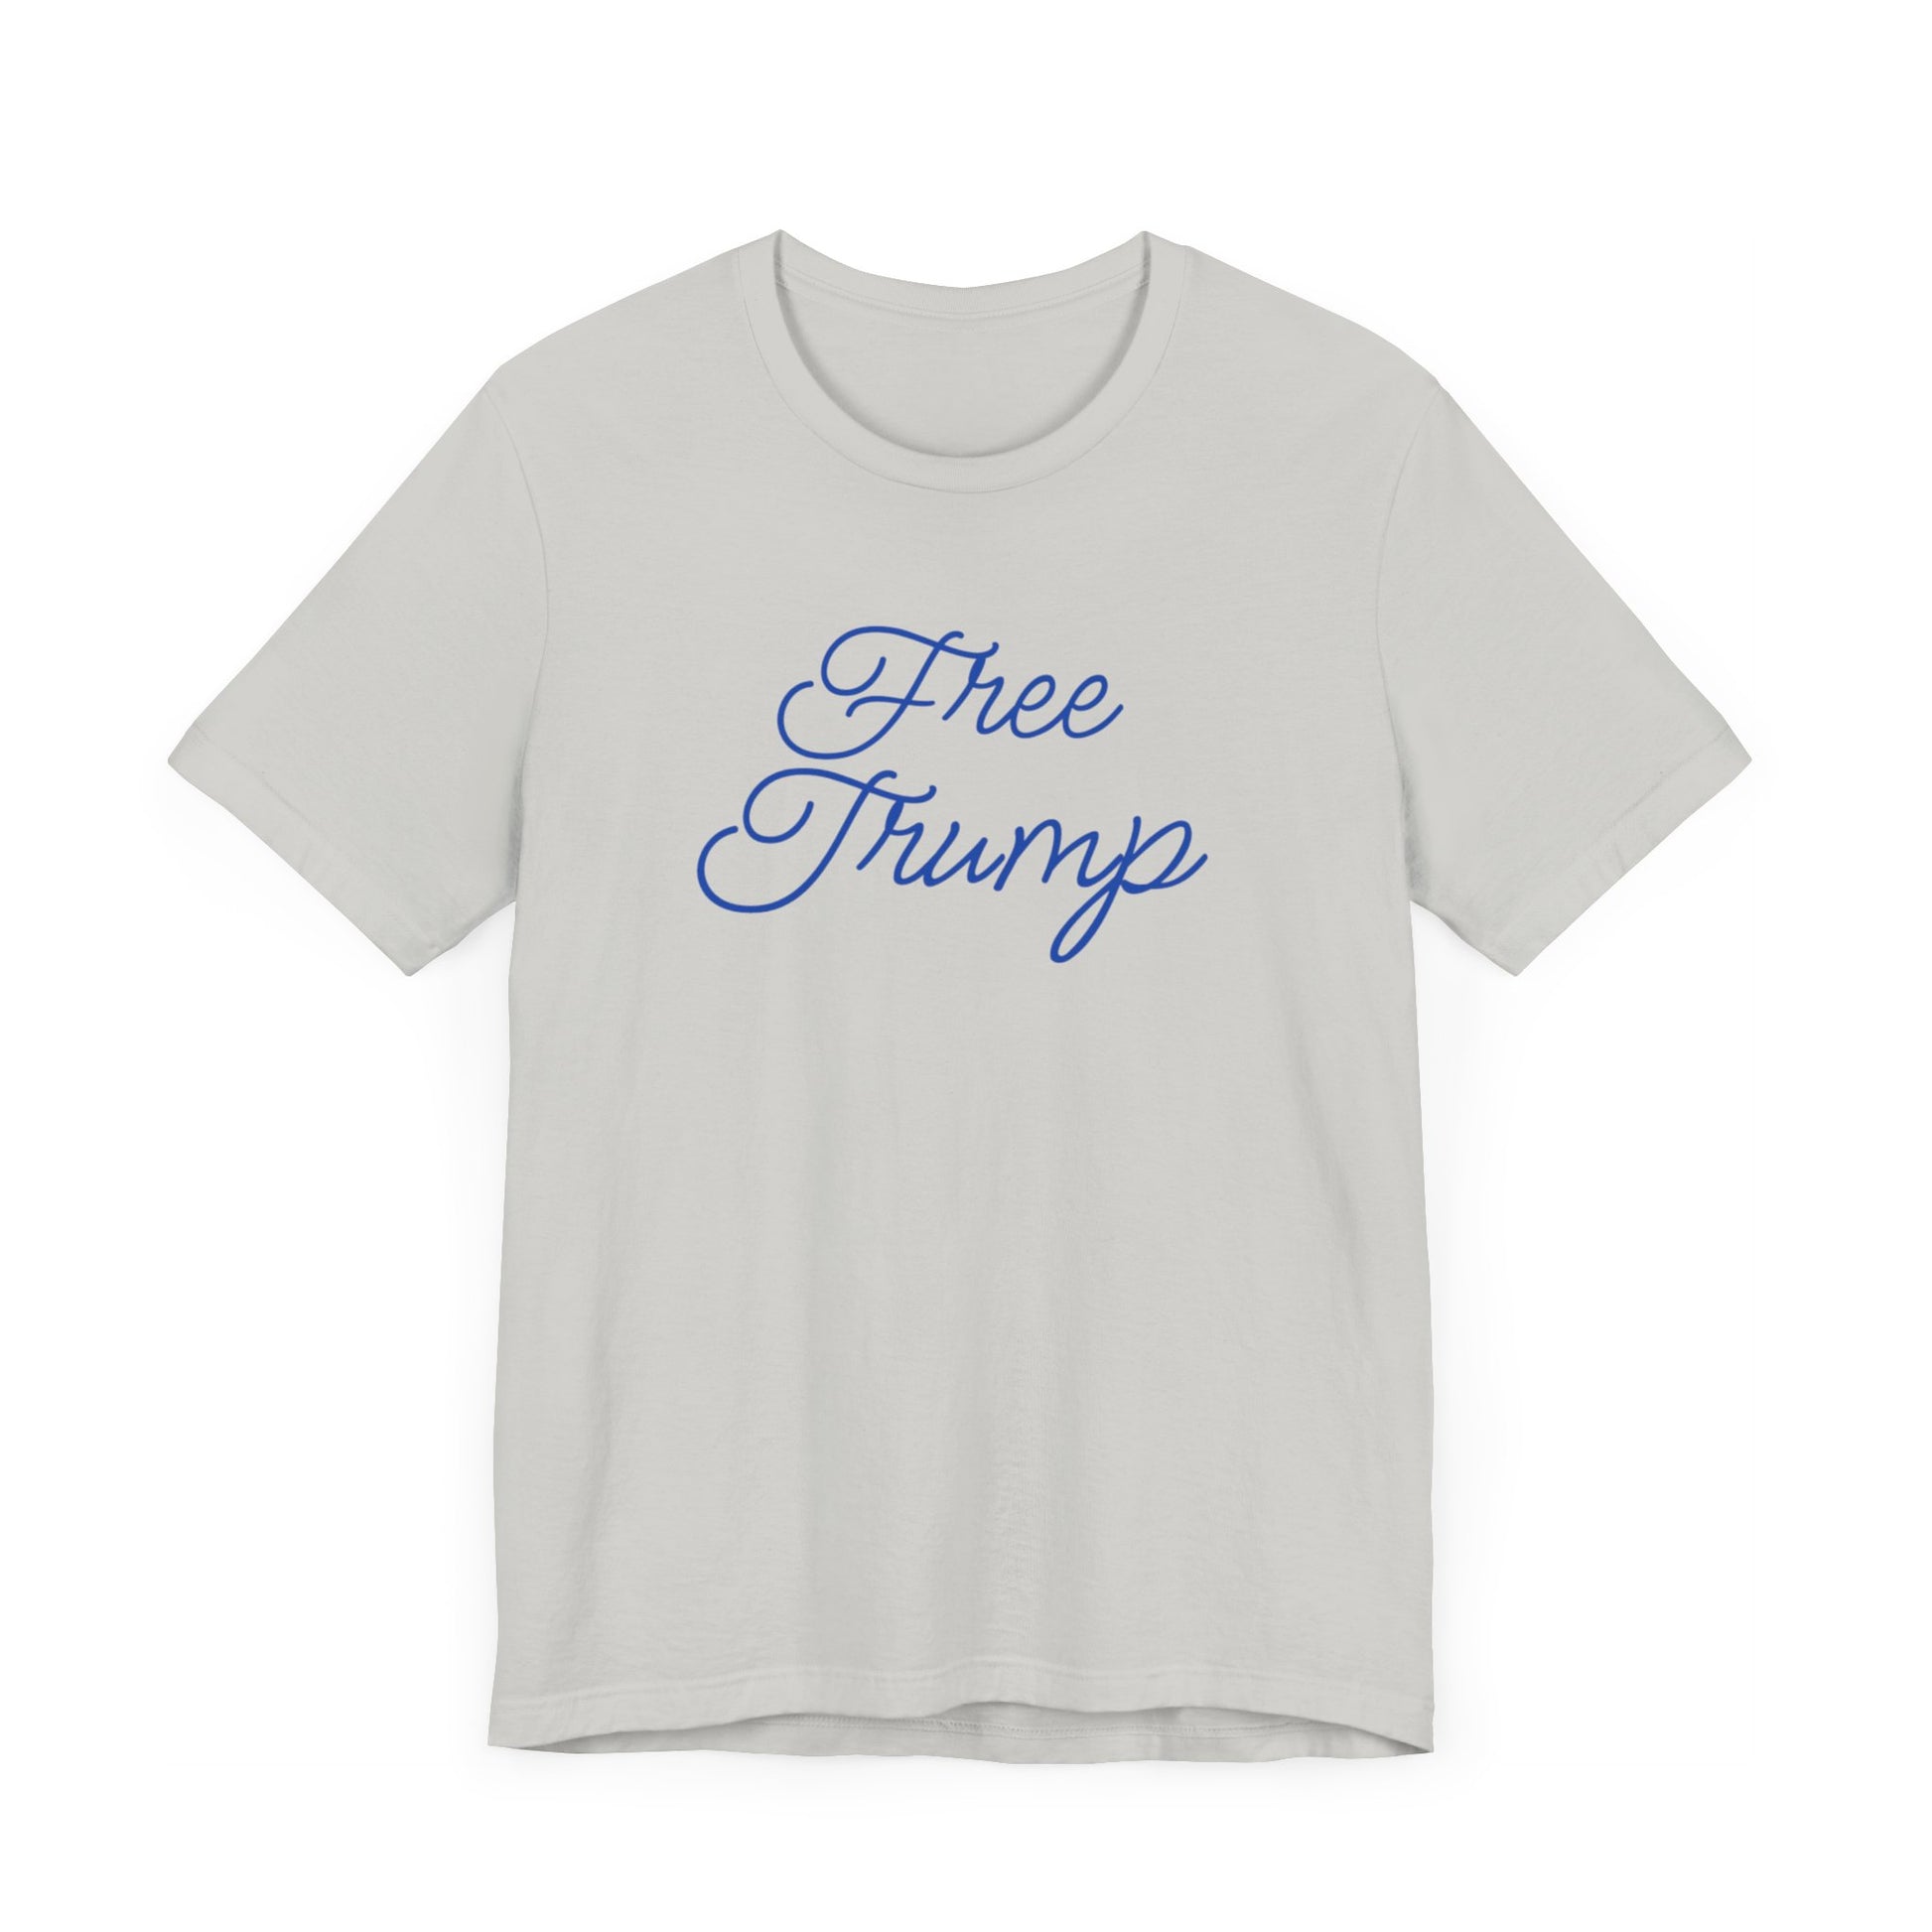 Get trendy with "Free Trump"  Unisex Jersey Short Sleeve Tee (Blue cursive text) - T-Shirt available at Good Gift Company. Grab yours for $16 today!